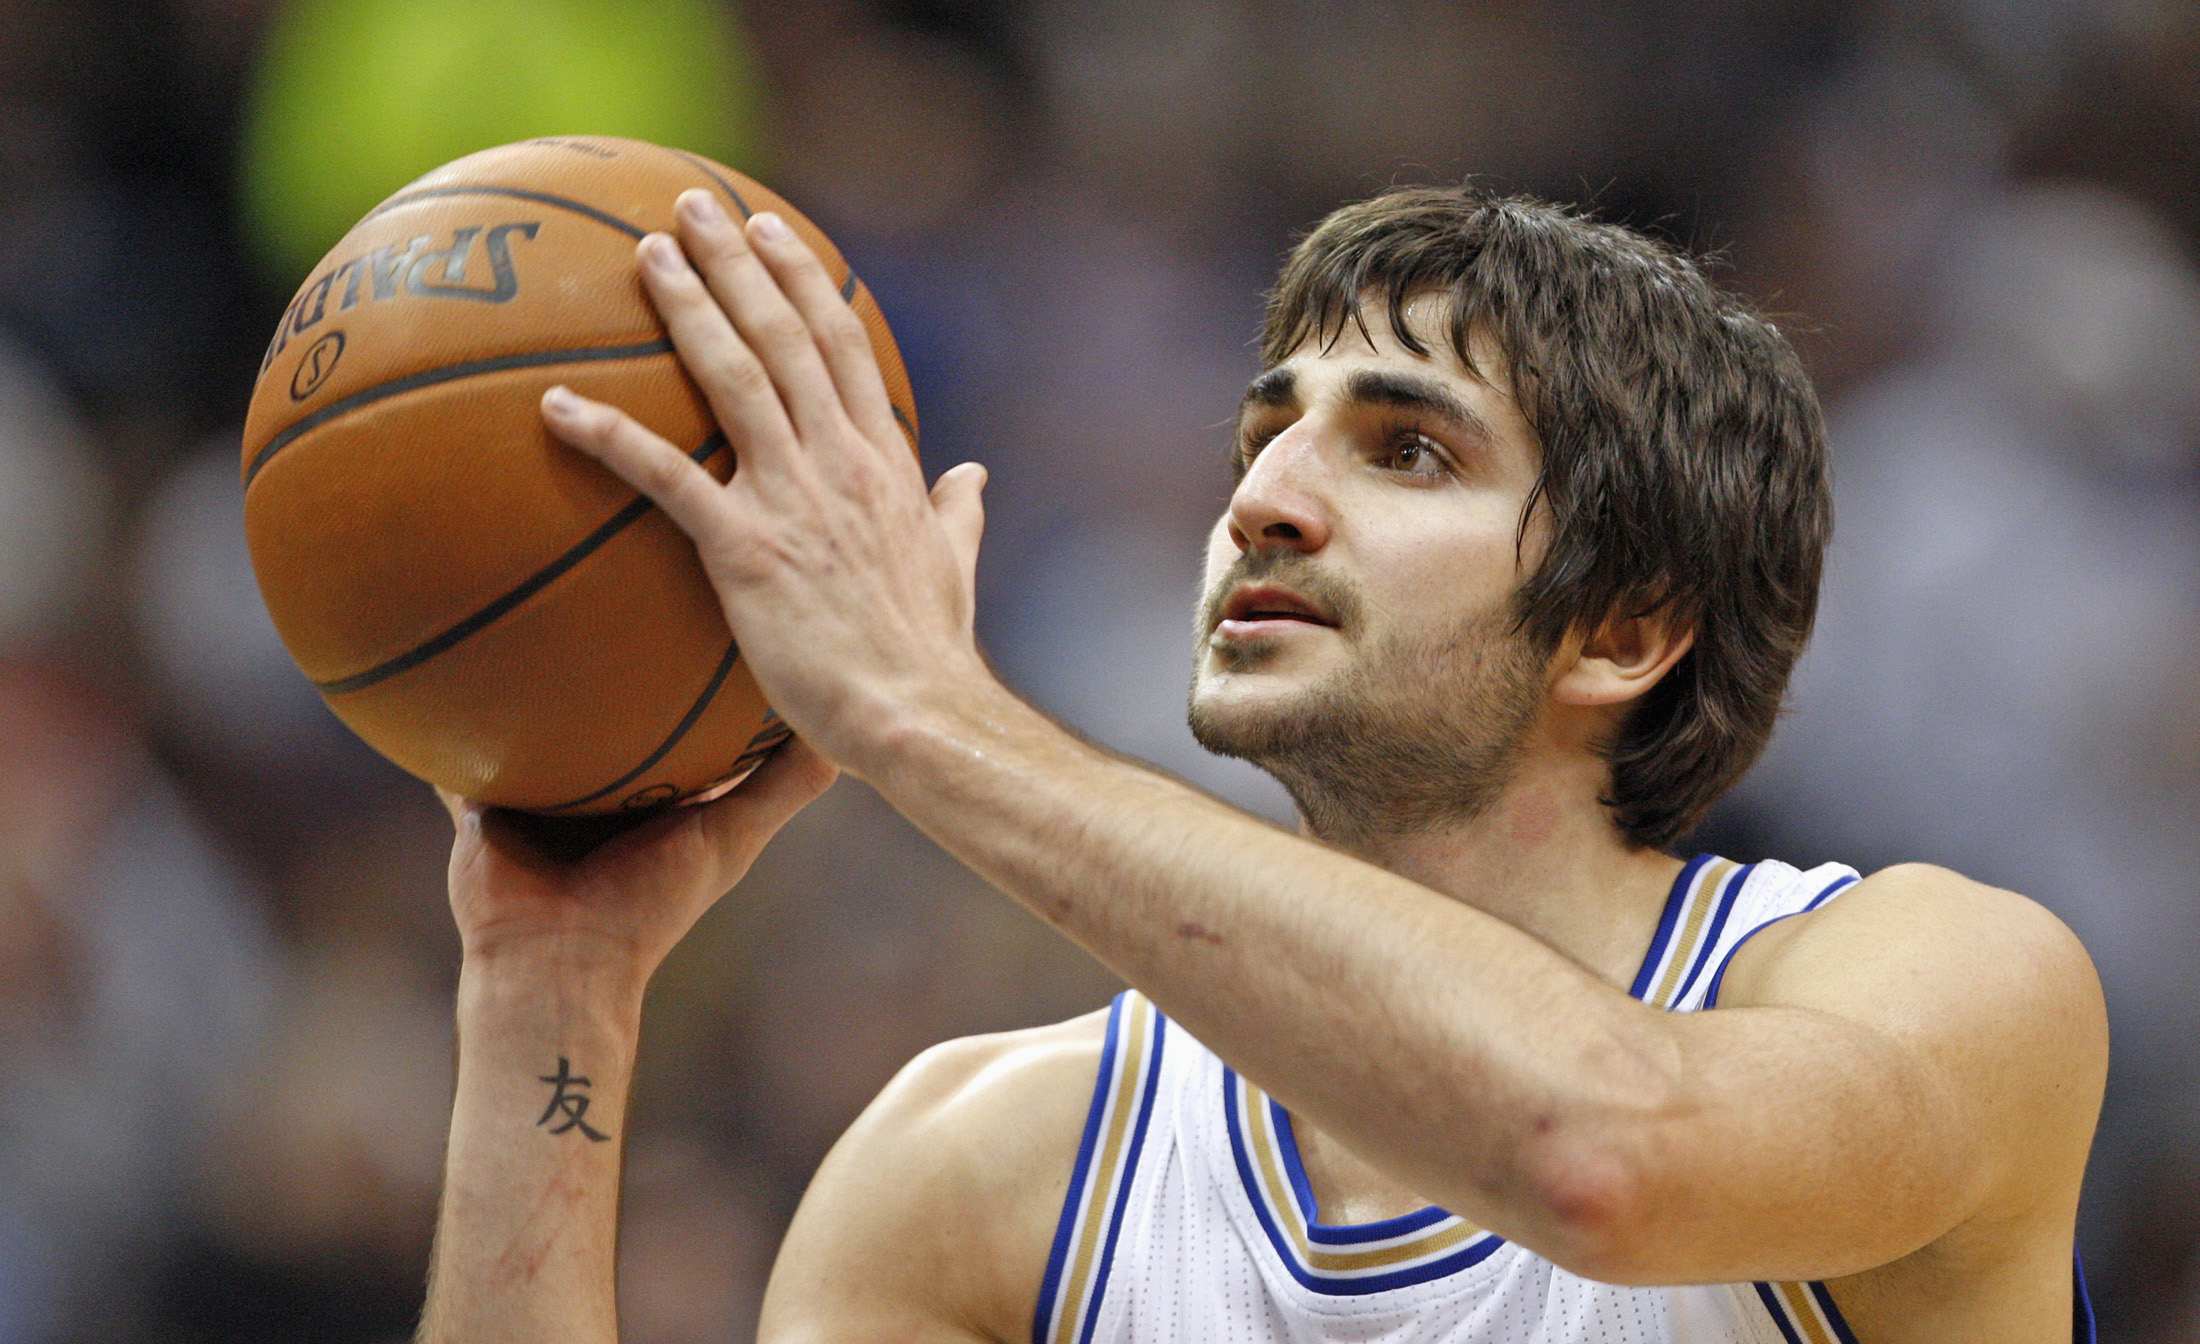 File photo of Minnesota Timberwolves guard Ricky Rubio shooting a free throw during their NBA game against Los Angeles Clippers